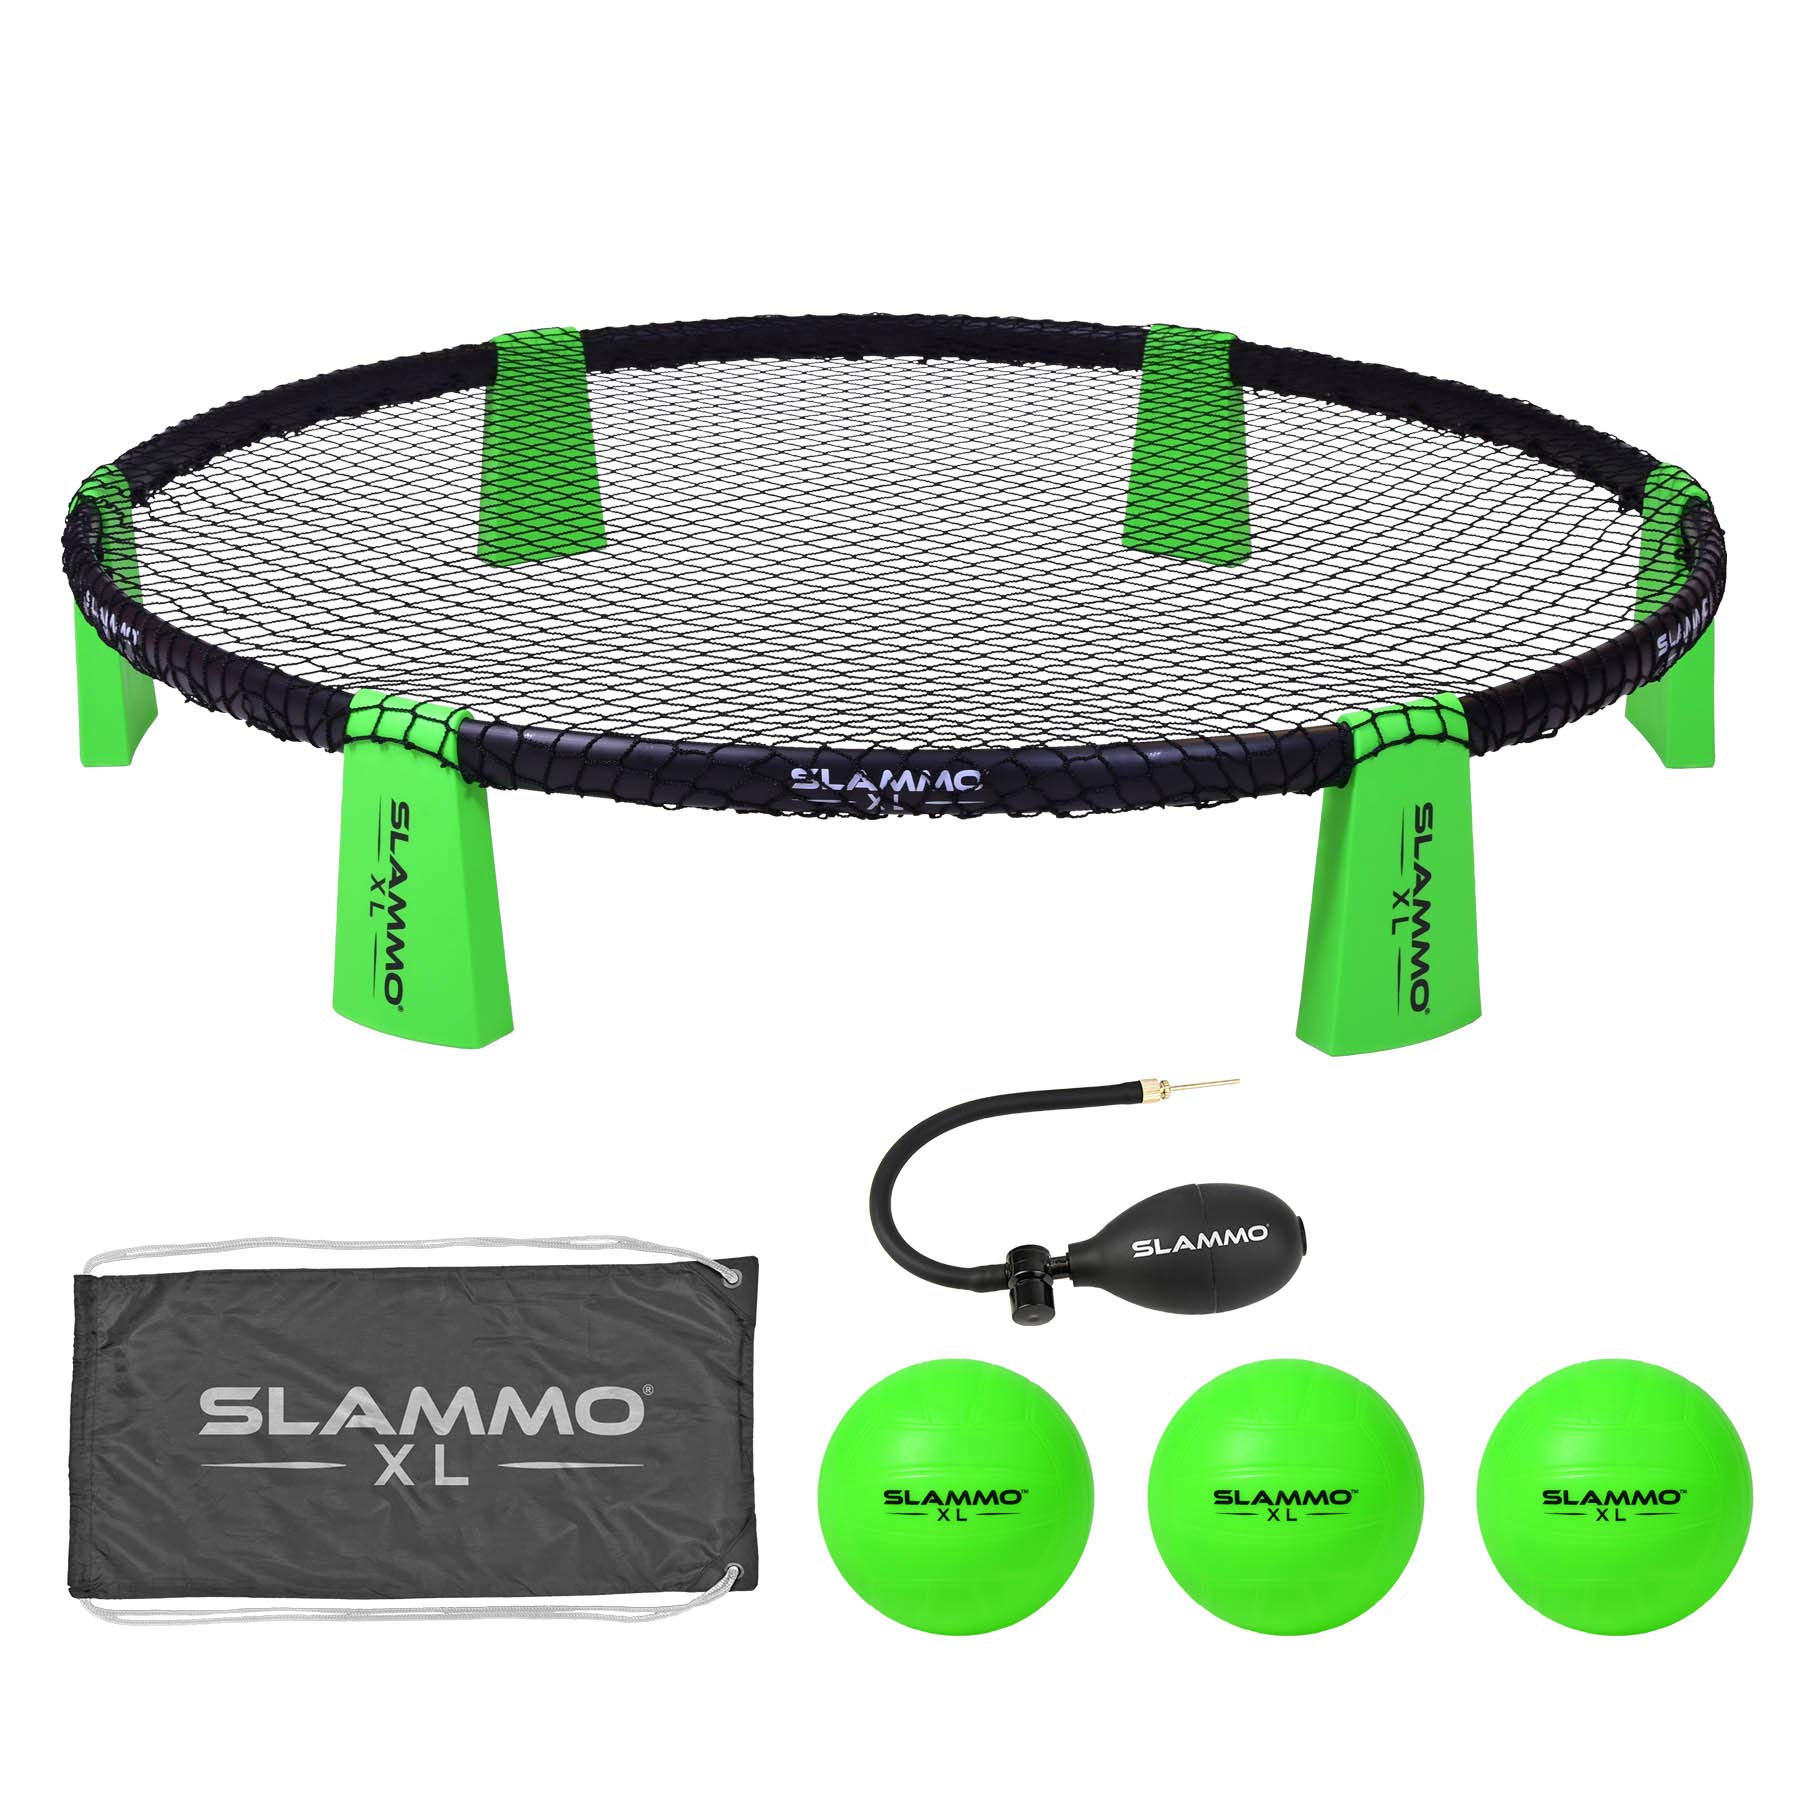 GoSports Slammo XL Game Set Huge 48 Inch Net Great for Beginners, Younger Players or Group Play